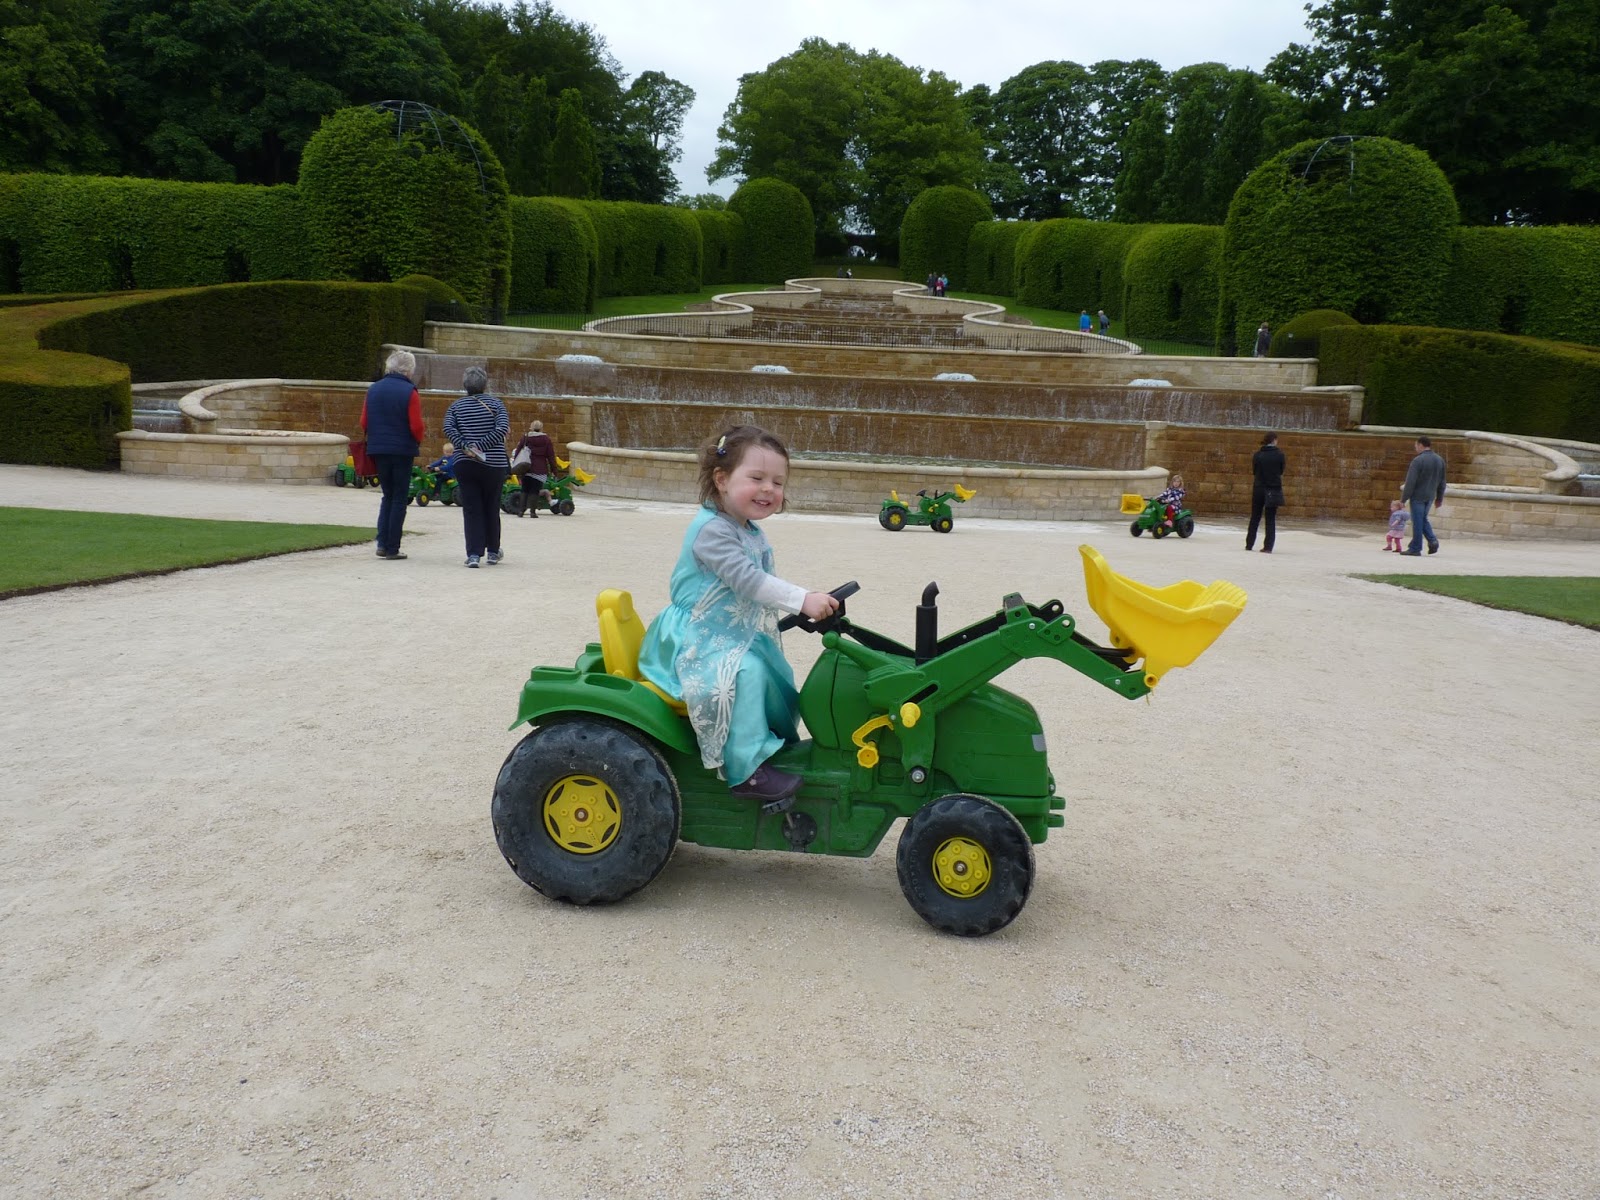  It's not all glamour being a fairy princess you know? We need to know how to drive diggers too!